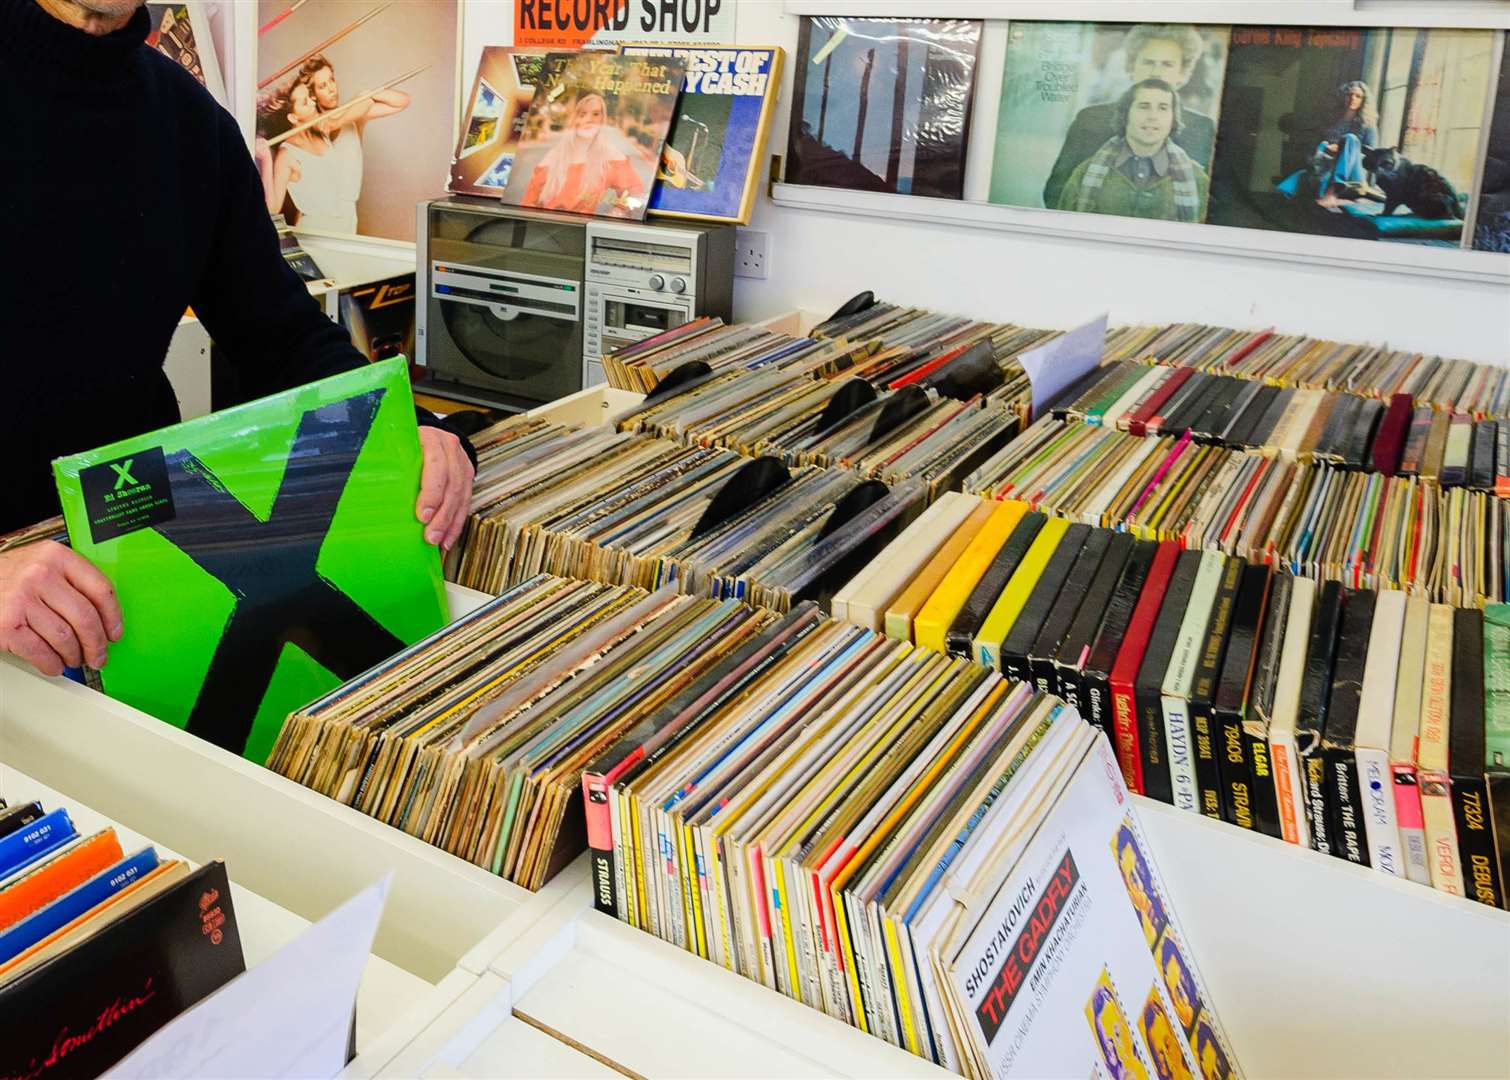 Record Store Day has been pushed back until June 20